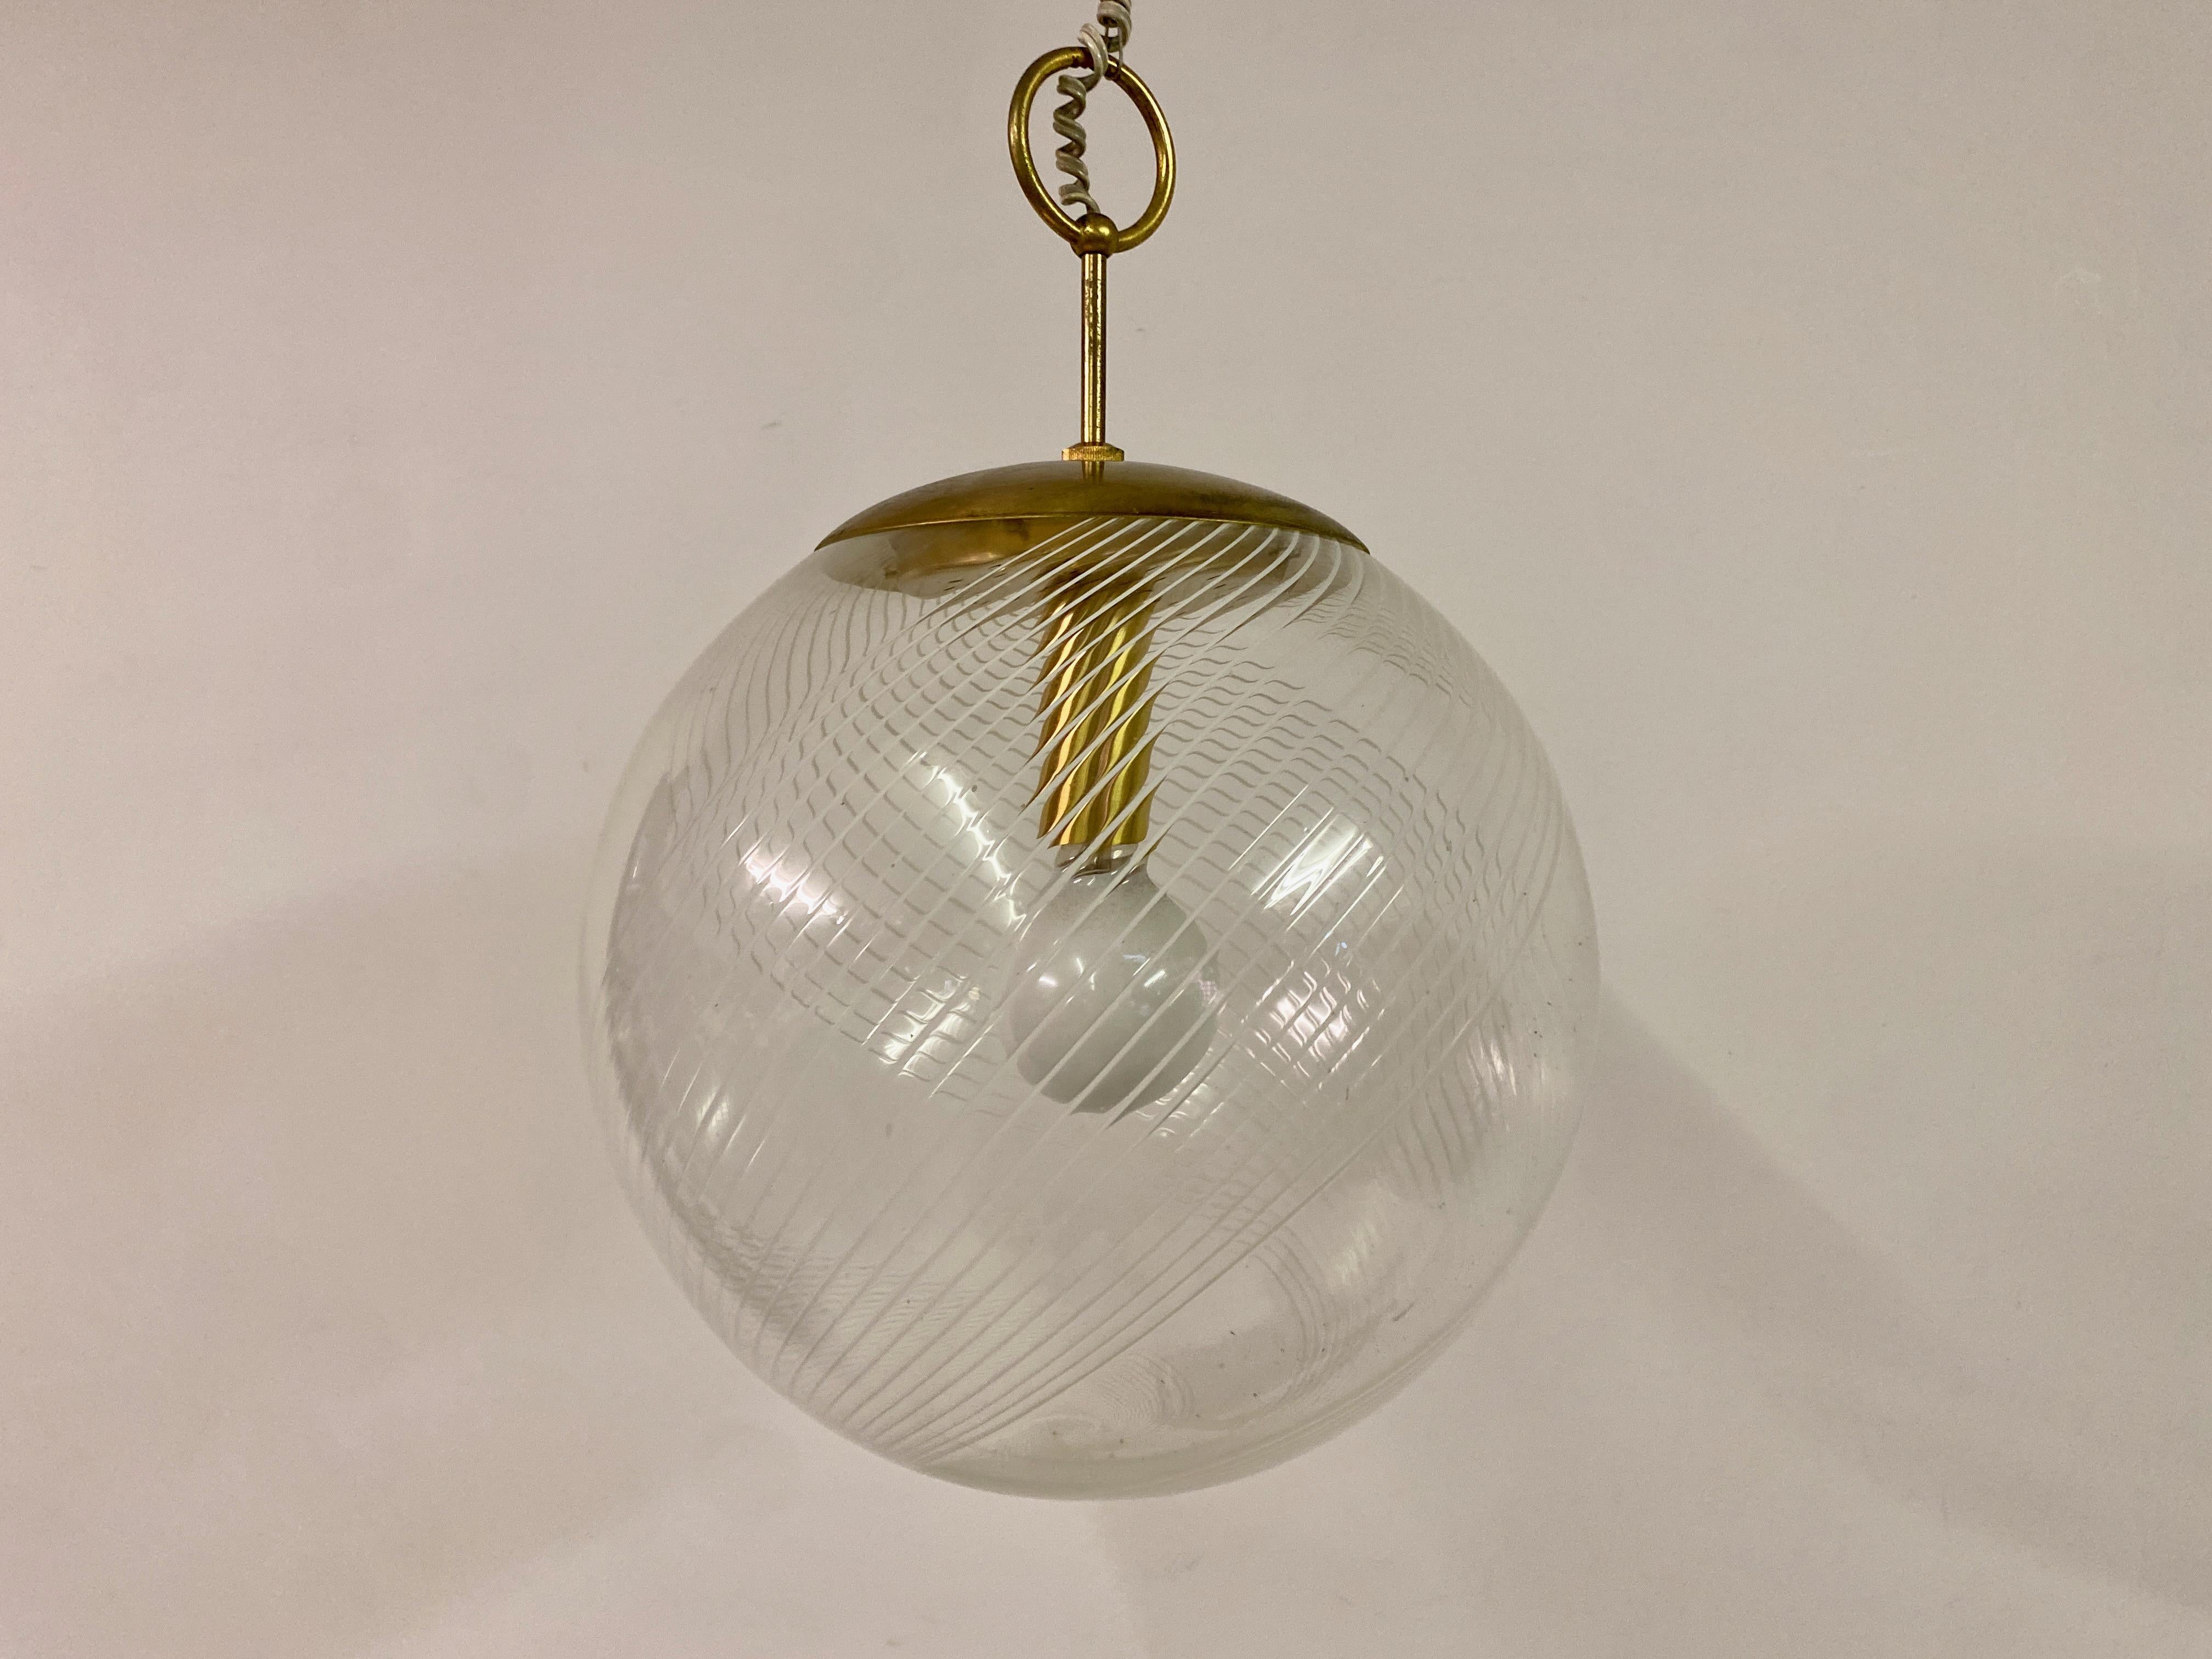 Ceiling pendant

Murano glass

Globe shaped

Brass fittings

Italy 1960s/1970s